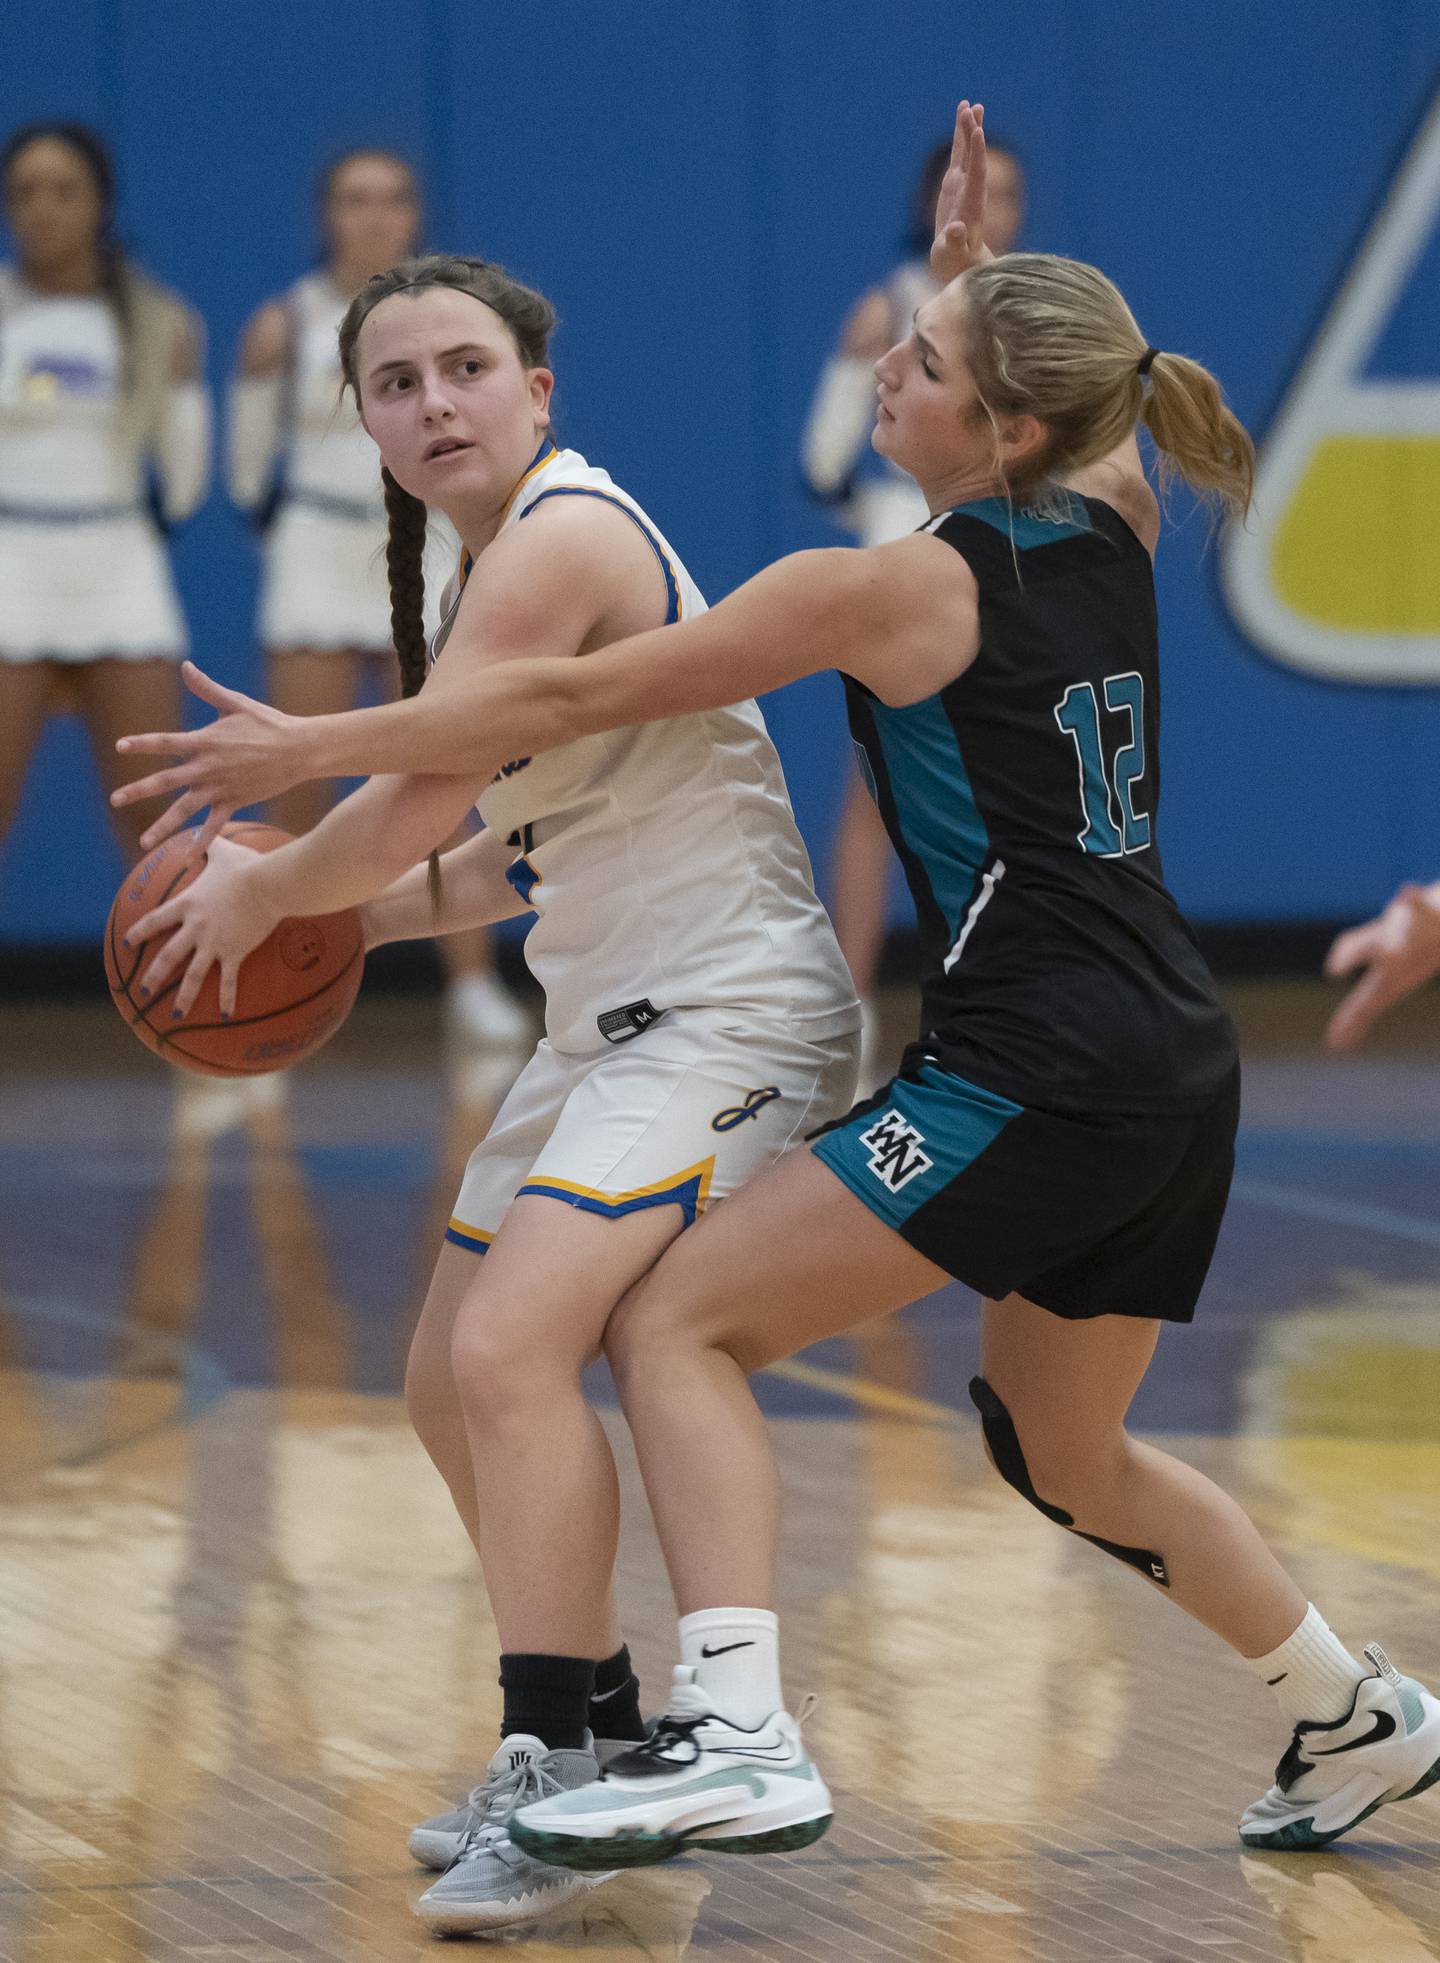 Johnsburg's Payton Toussaint looks to pass under pressure from Woodstock North's Addison Rishling during their game on Tuesday, February 8, 2022 at Johnsburg High School. Woodstock North won 48-37. Ryan Rayburn for Shaw Local